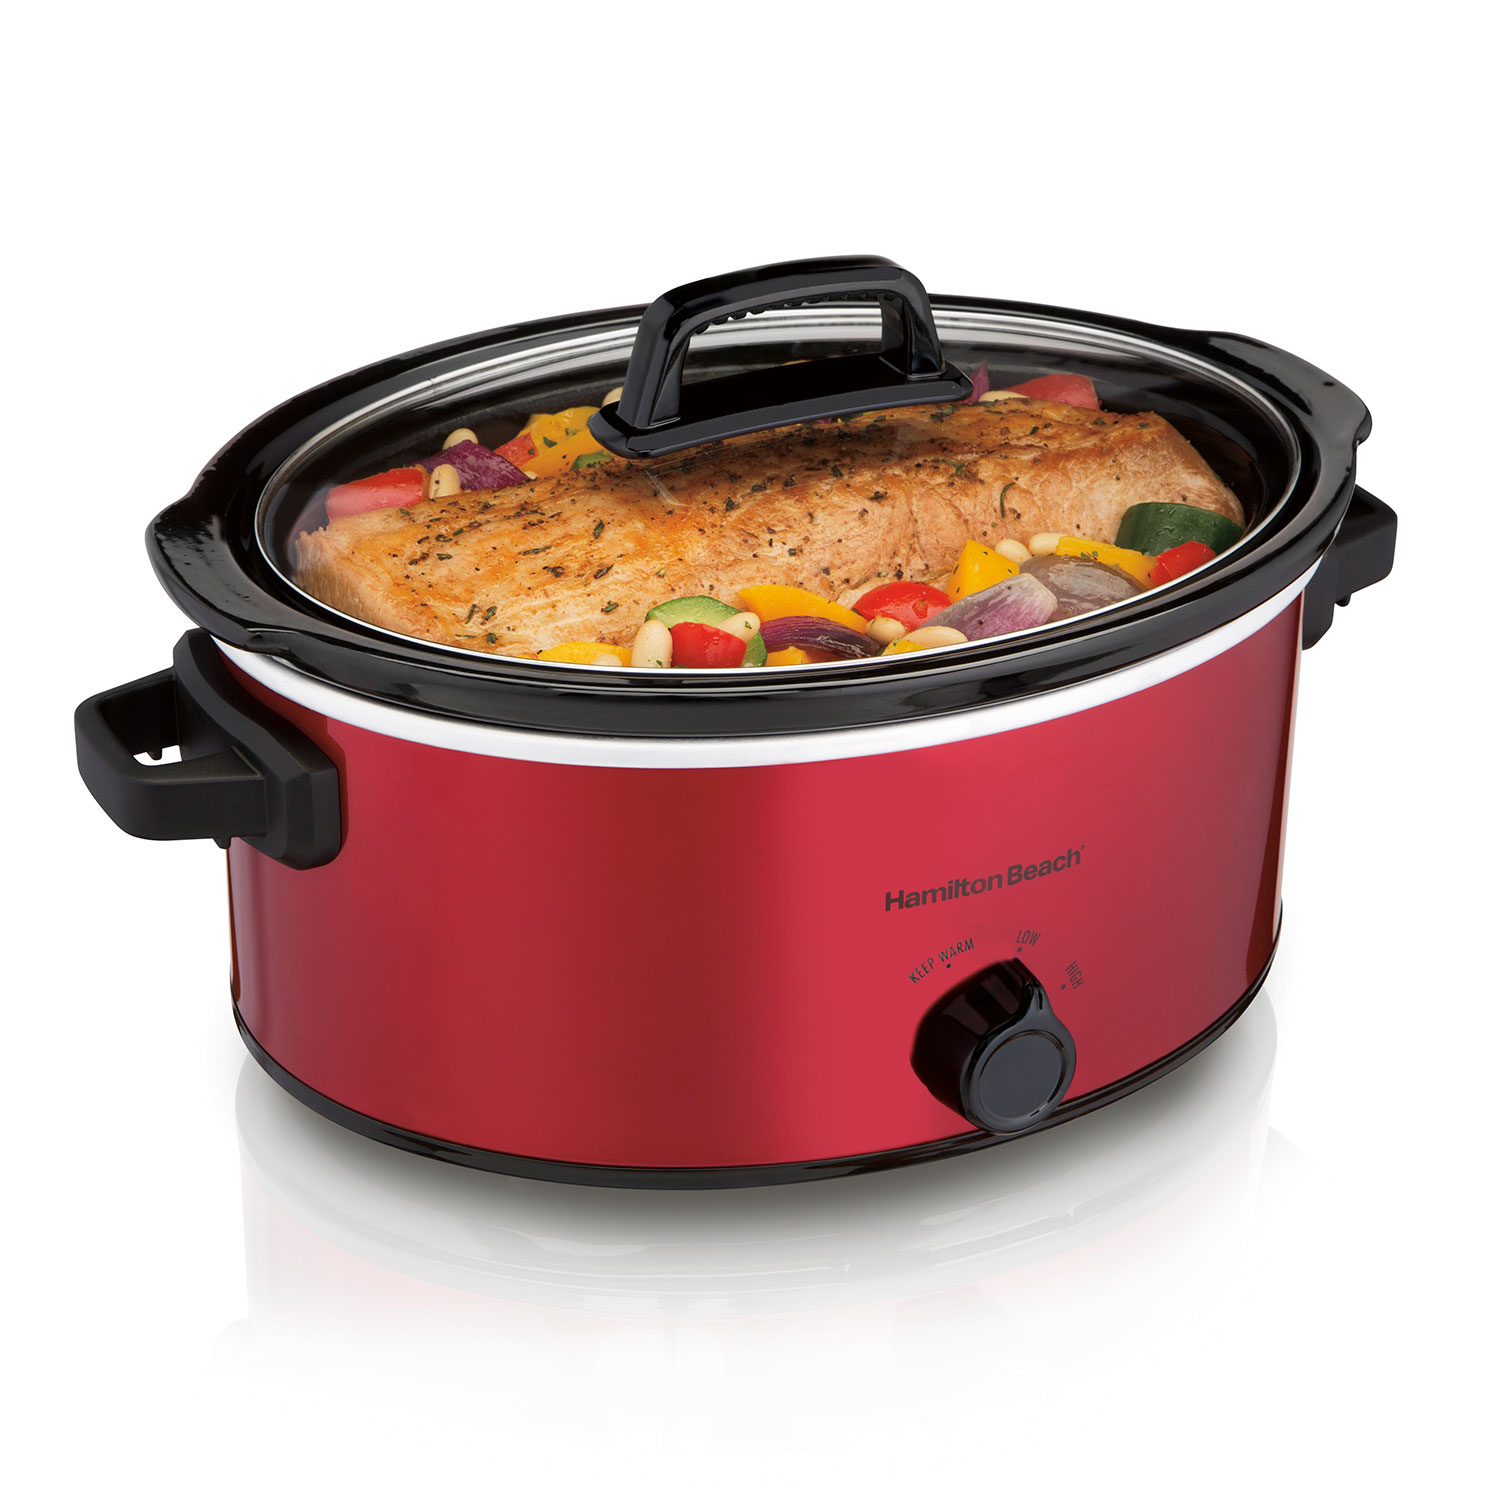 6 Quart Oval Slow Cooker, Red - (33666)